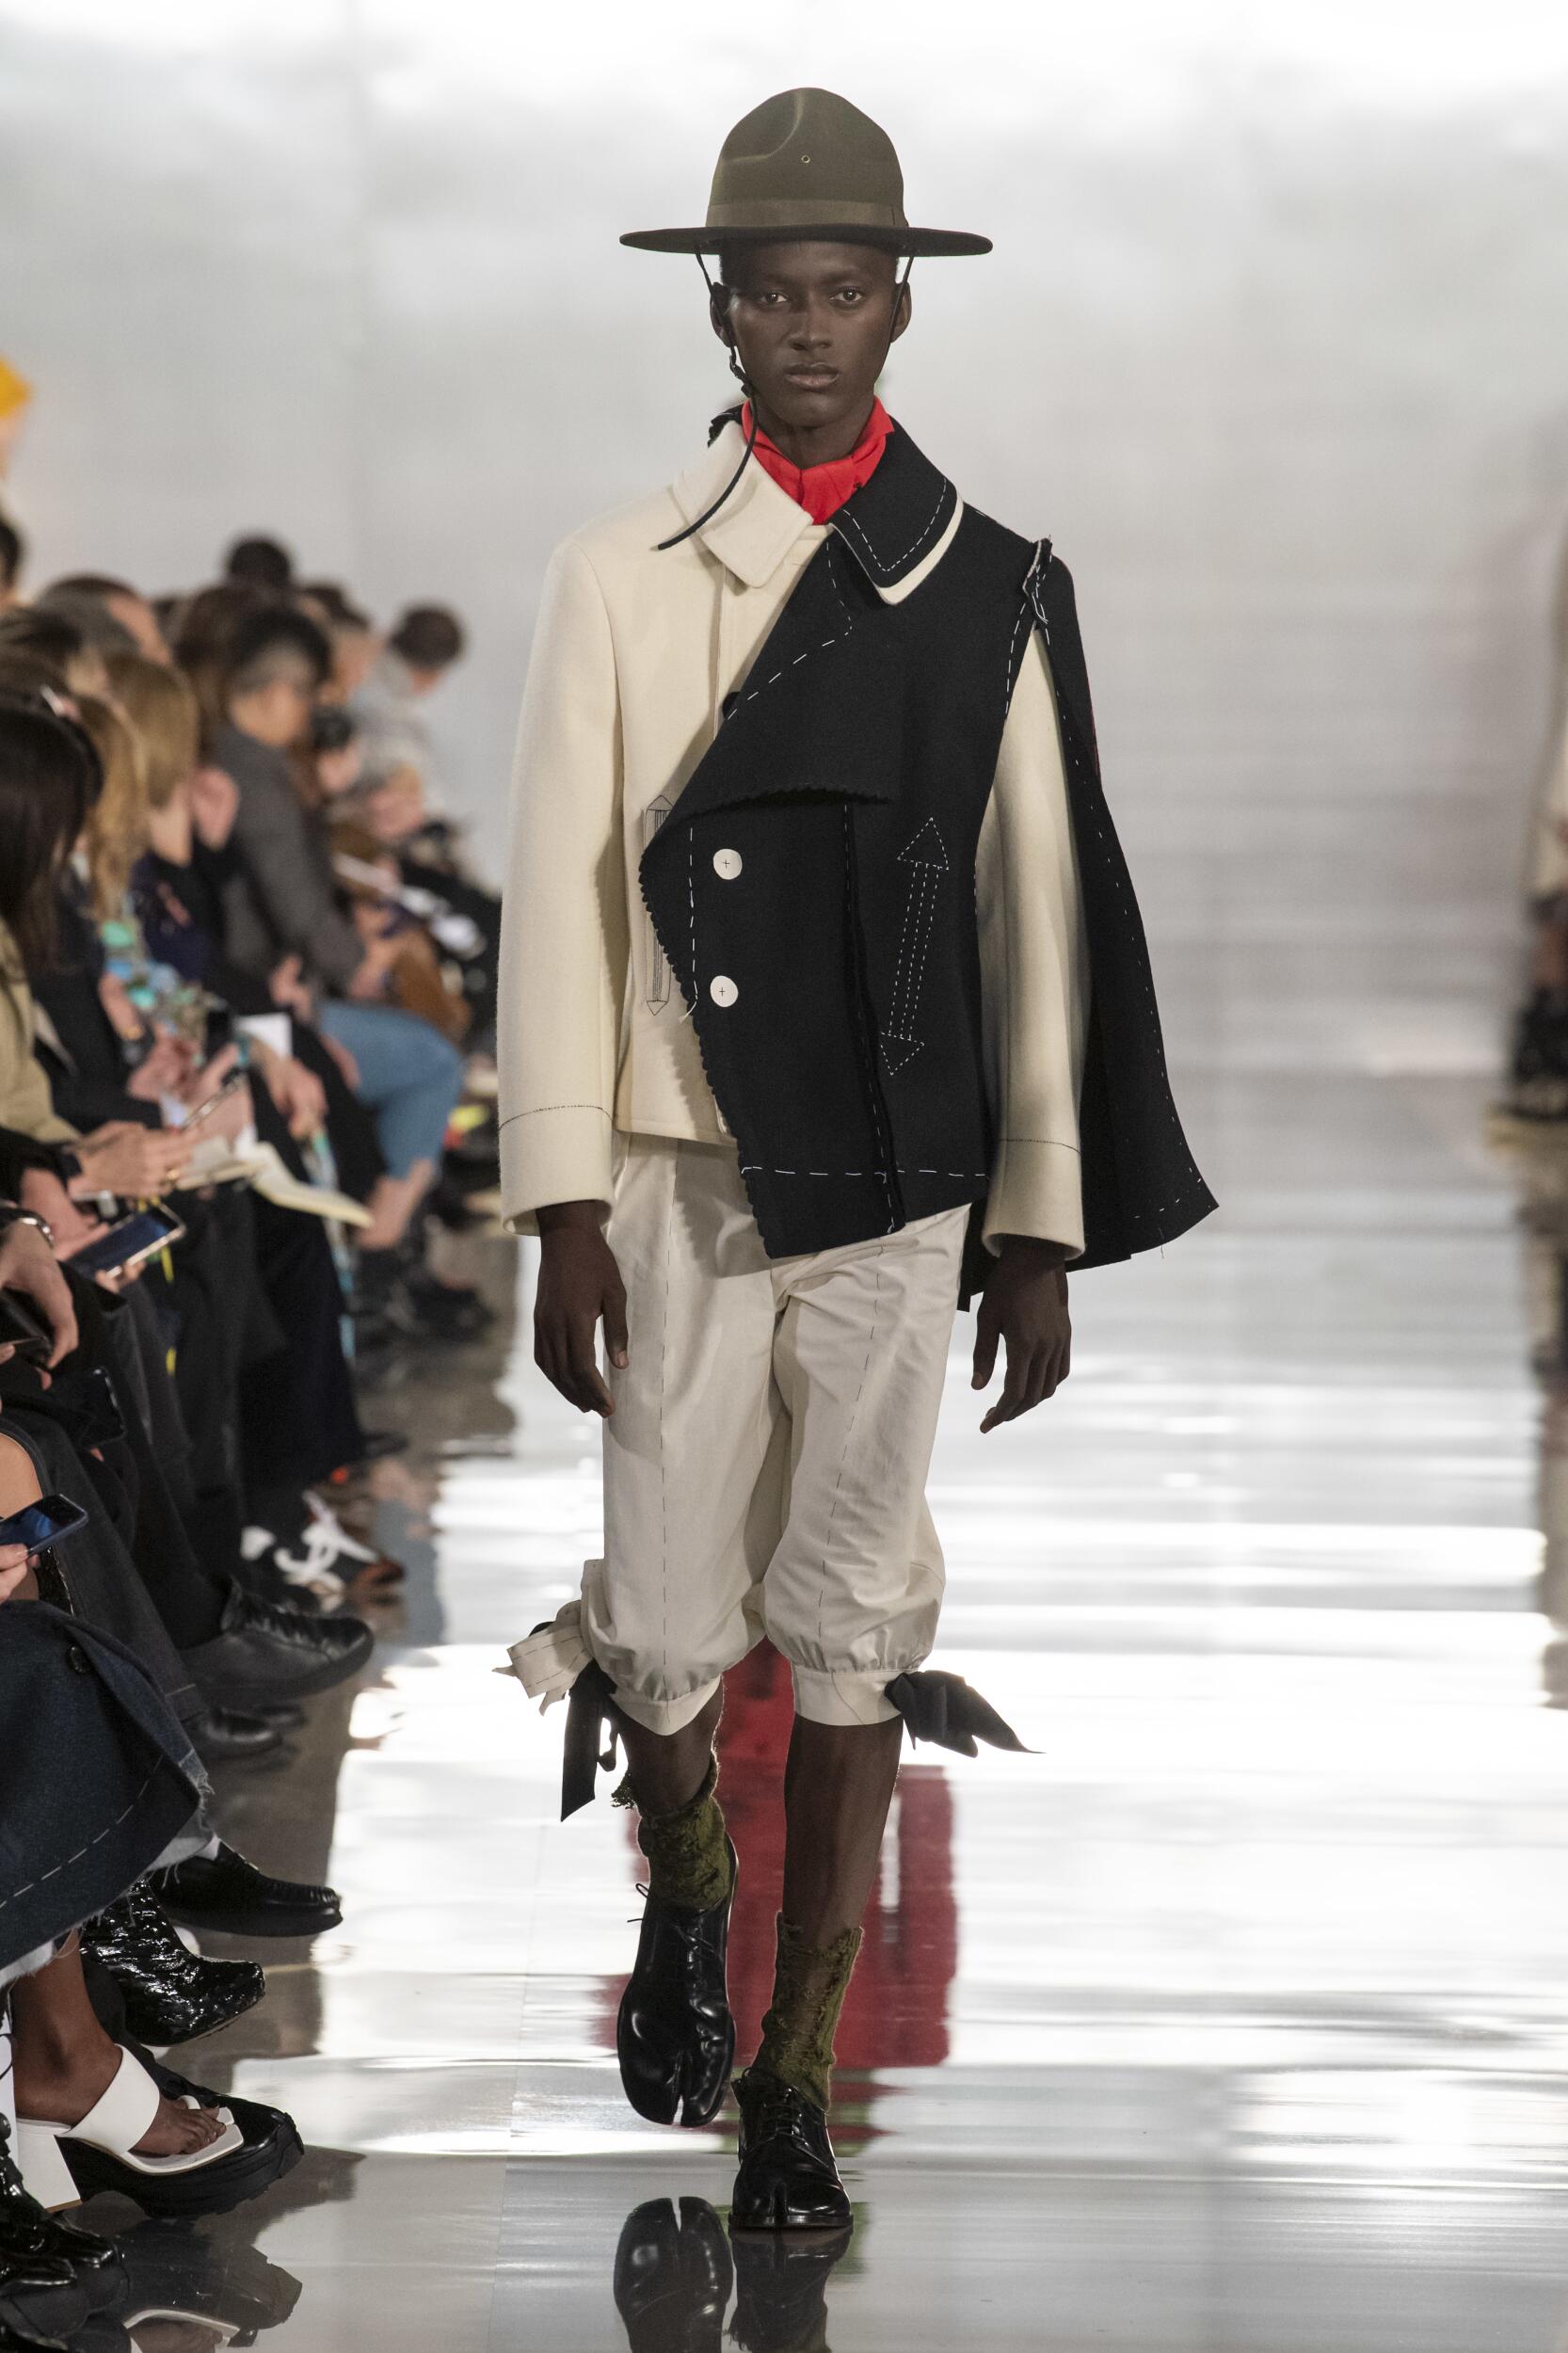 MAISON MARGIELA FALL WINTER 2020 COLLECTION | The Skinny Beep